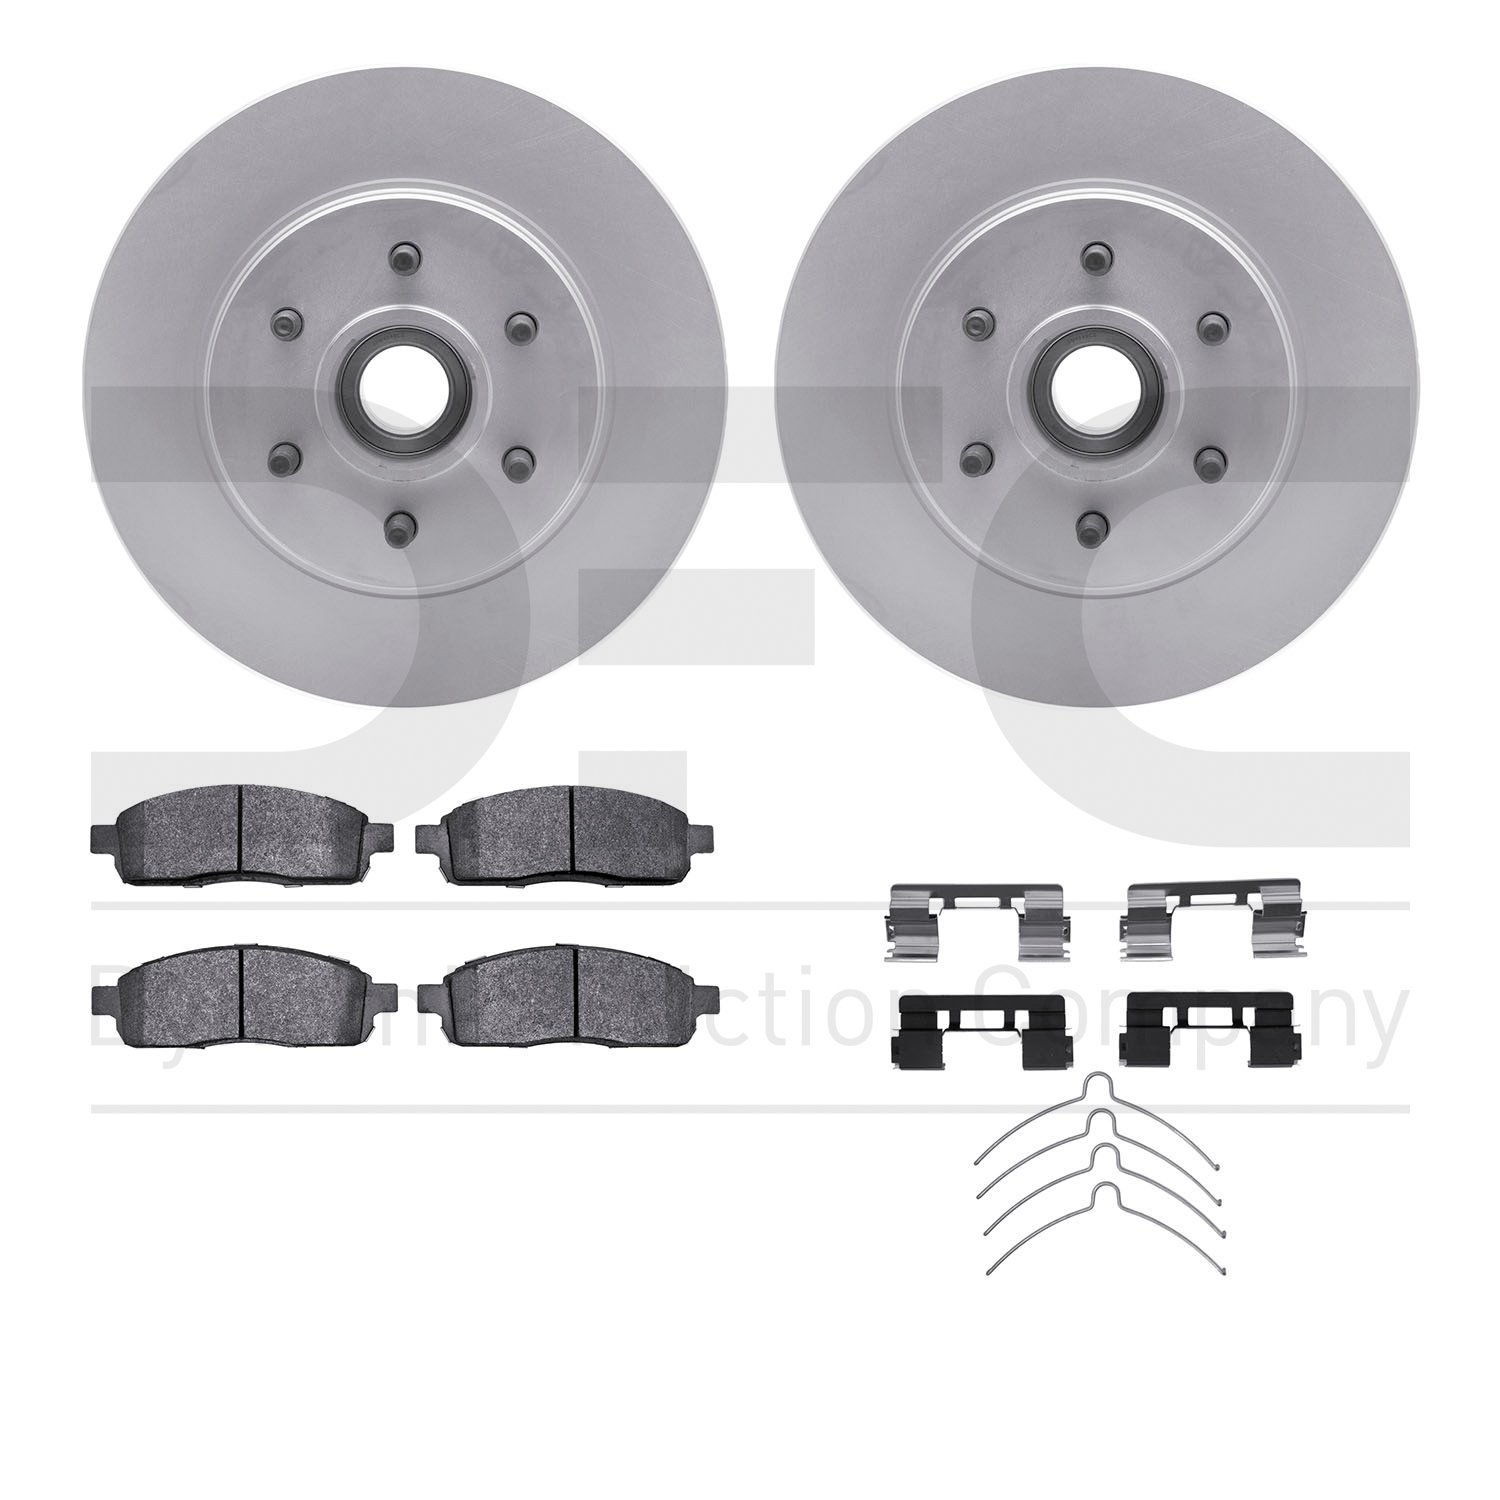 4412-54046 Geospec Brake Rotors with Ultimate-Duty Brake Pads & Hardware, 2004-2008 Ford/Lincoln/Mercury/Mazda, Position: Front